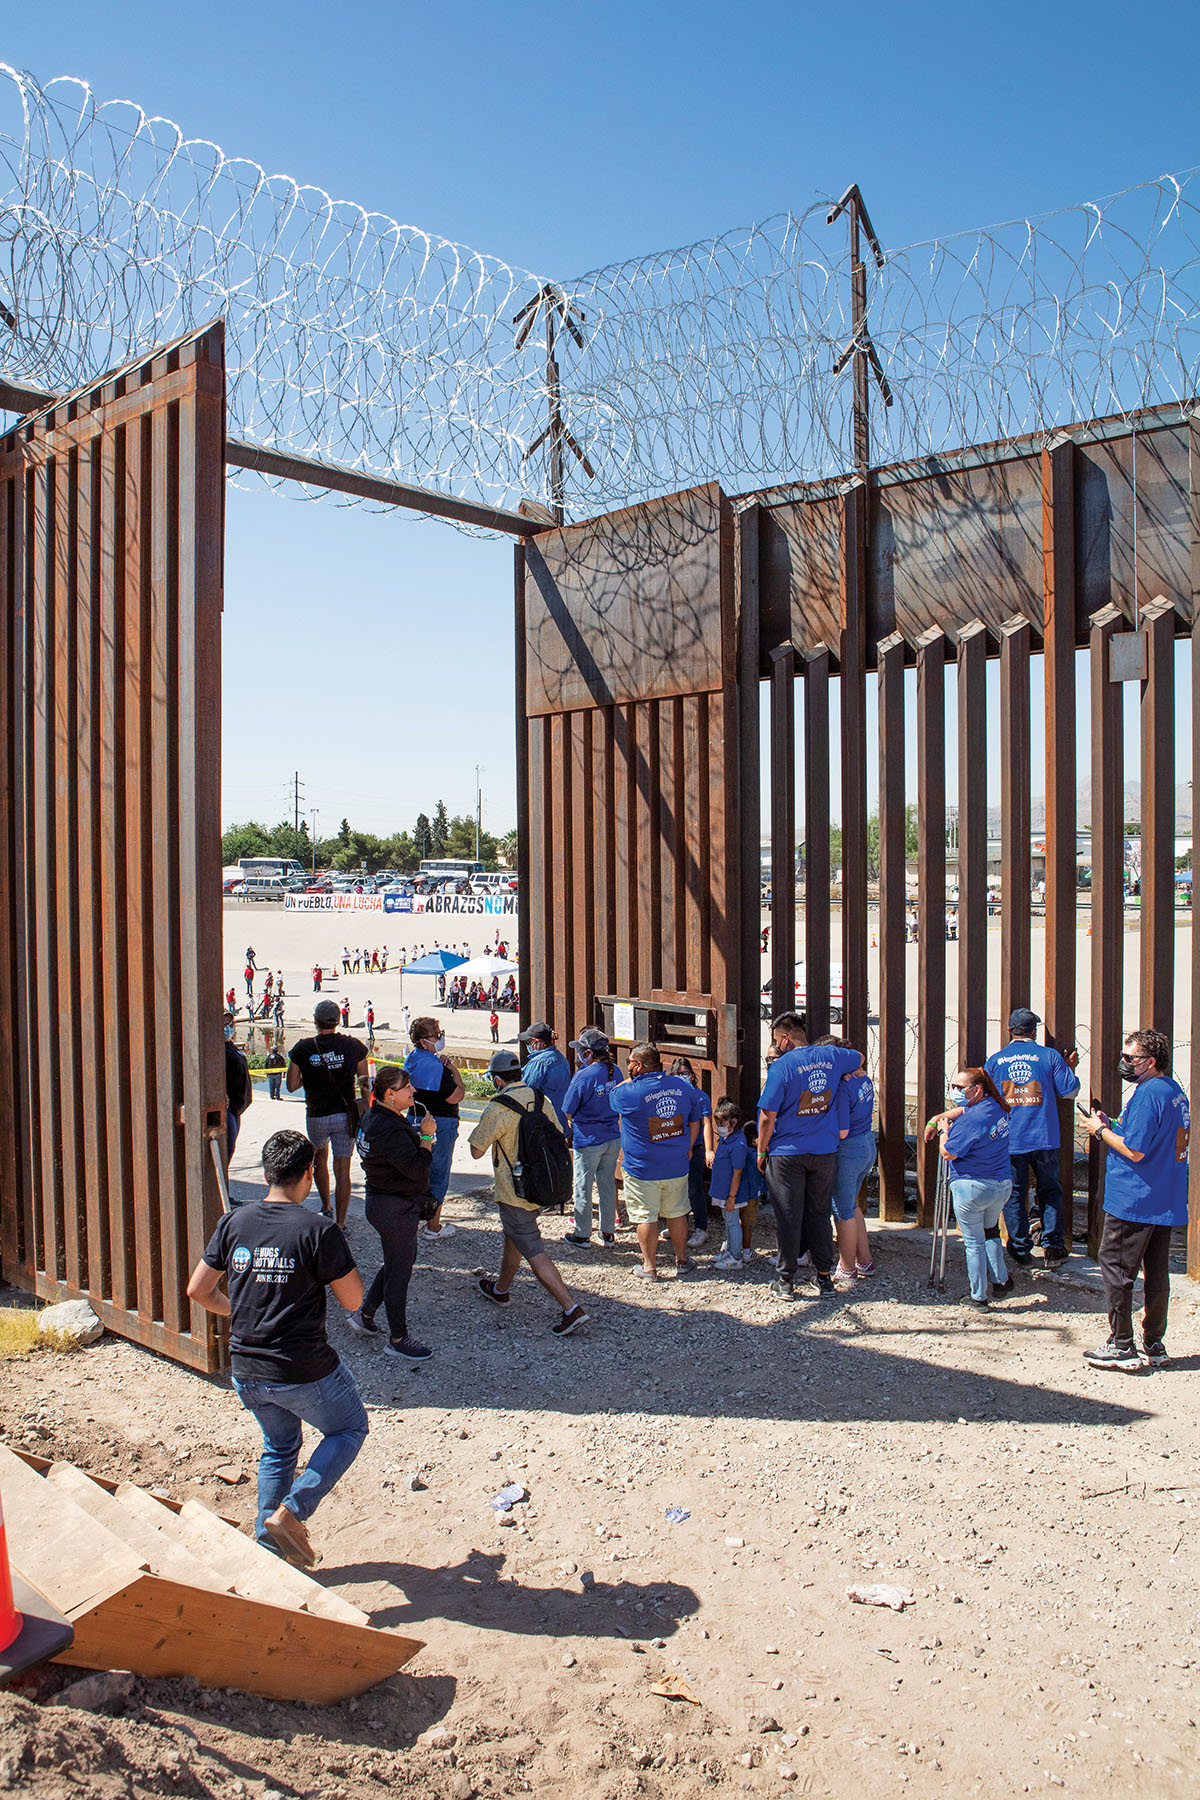 People line up to walk through an opening in a large fence under a blue desert sky